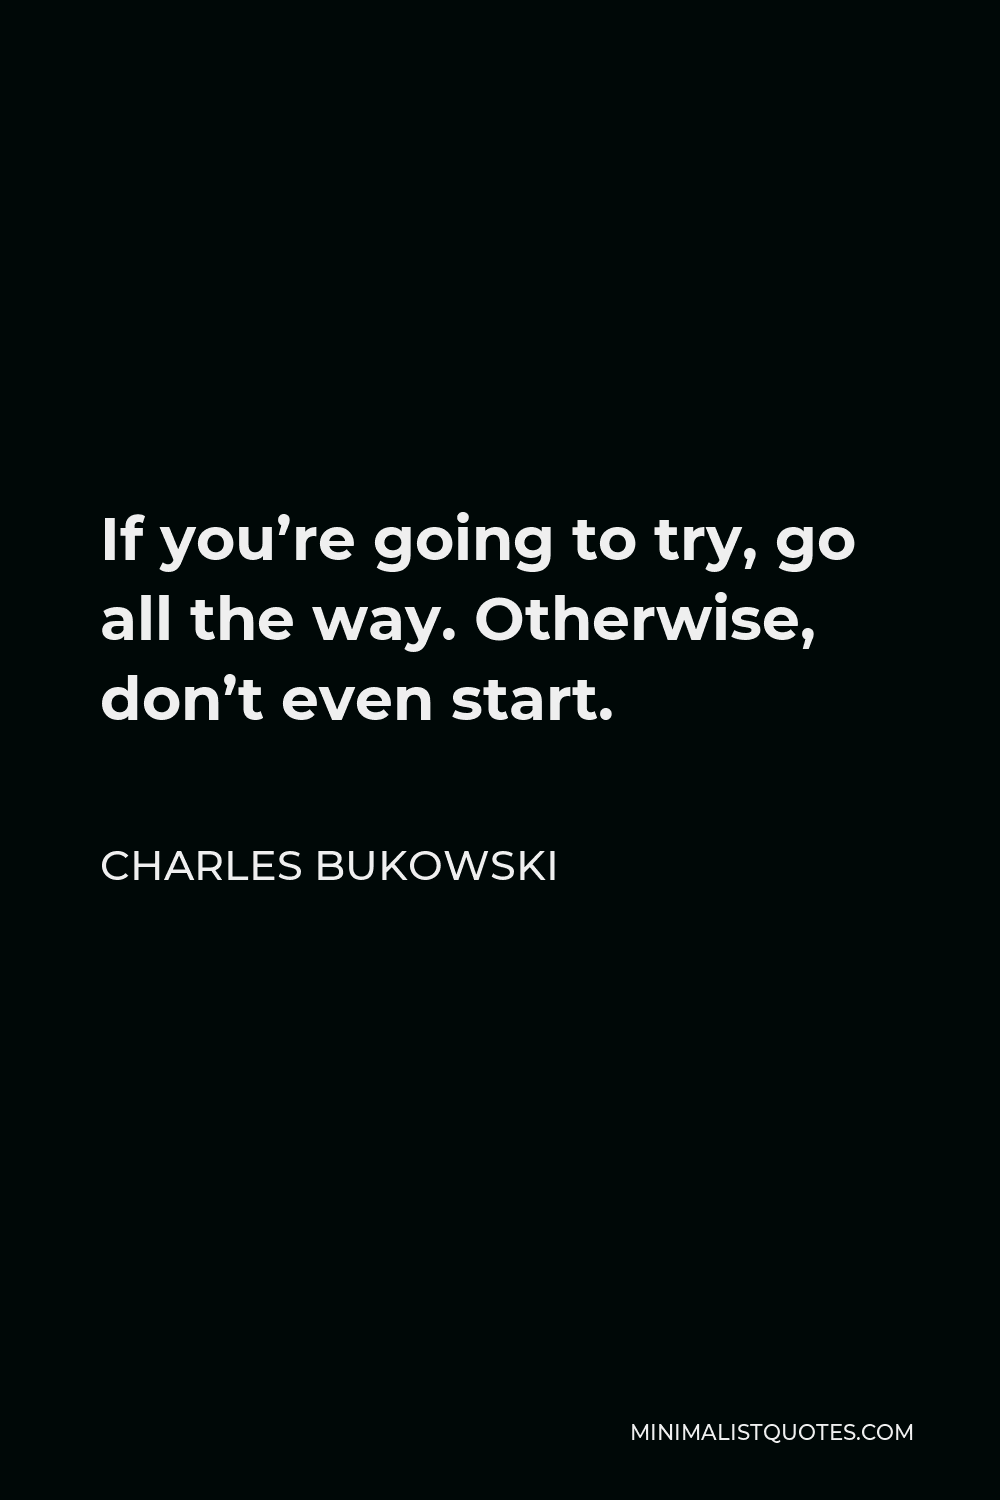 Charles Bukowski Quote: If You're Going To Try, Go All The Way. Otherwise, Don't Even Start.